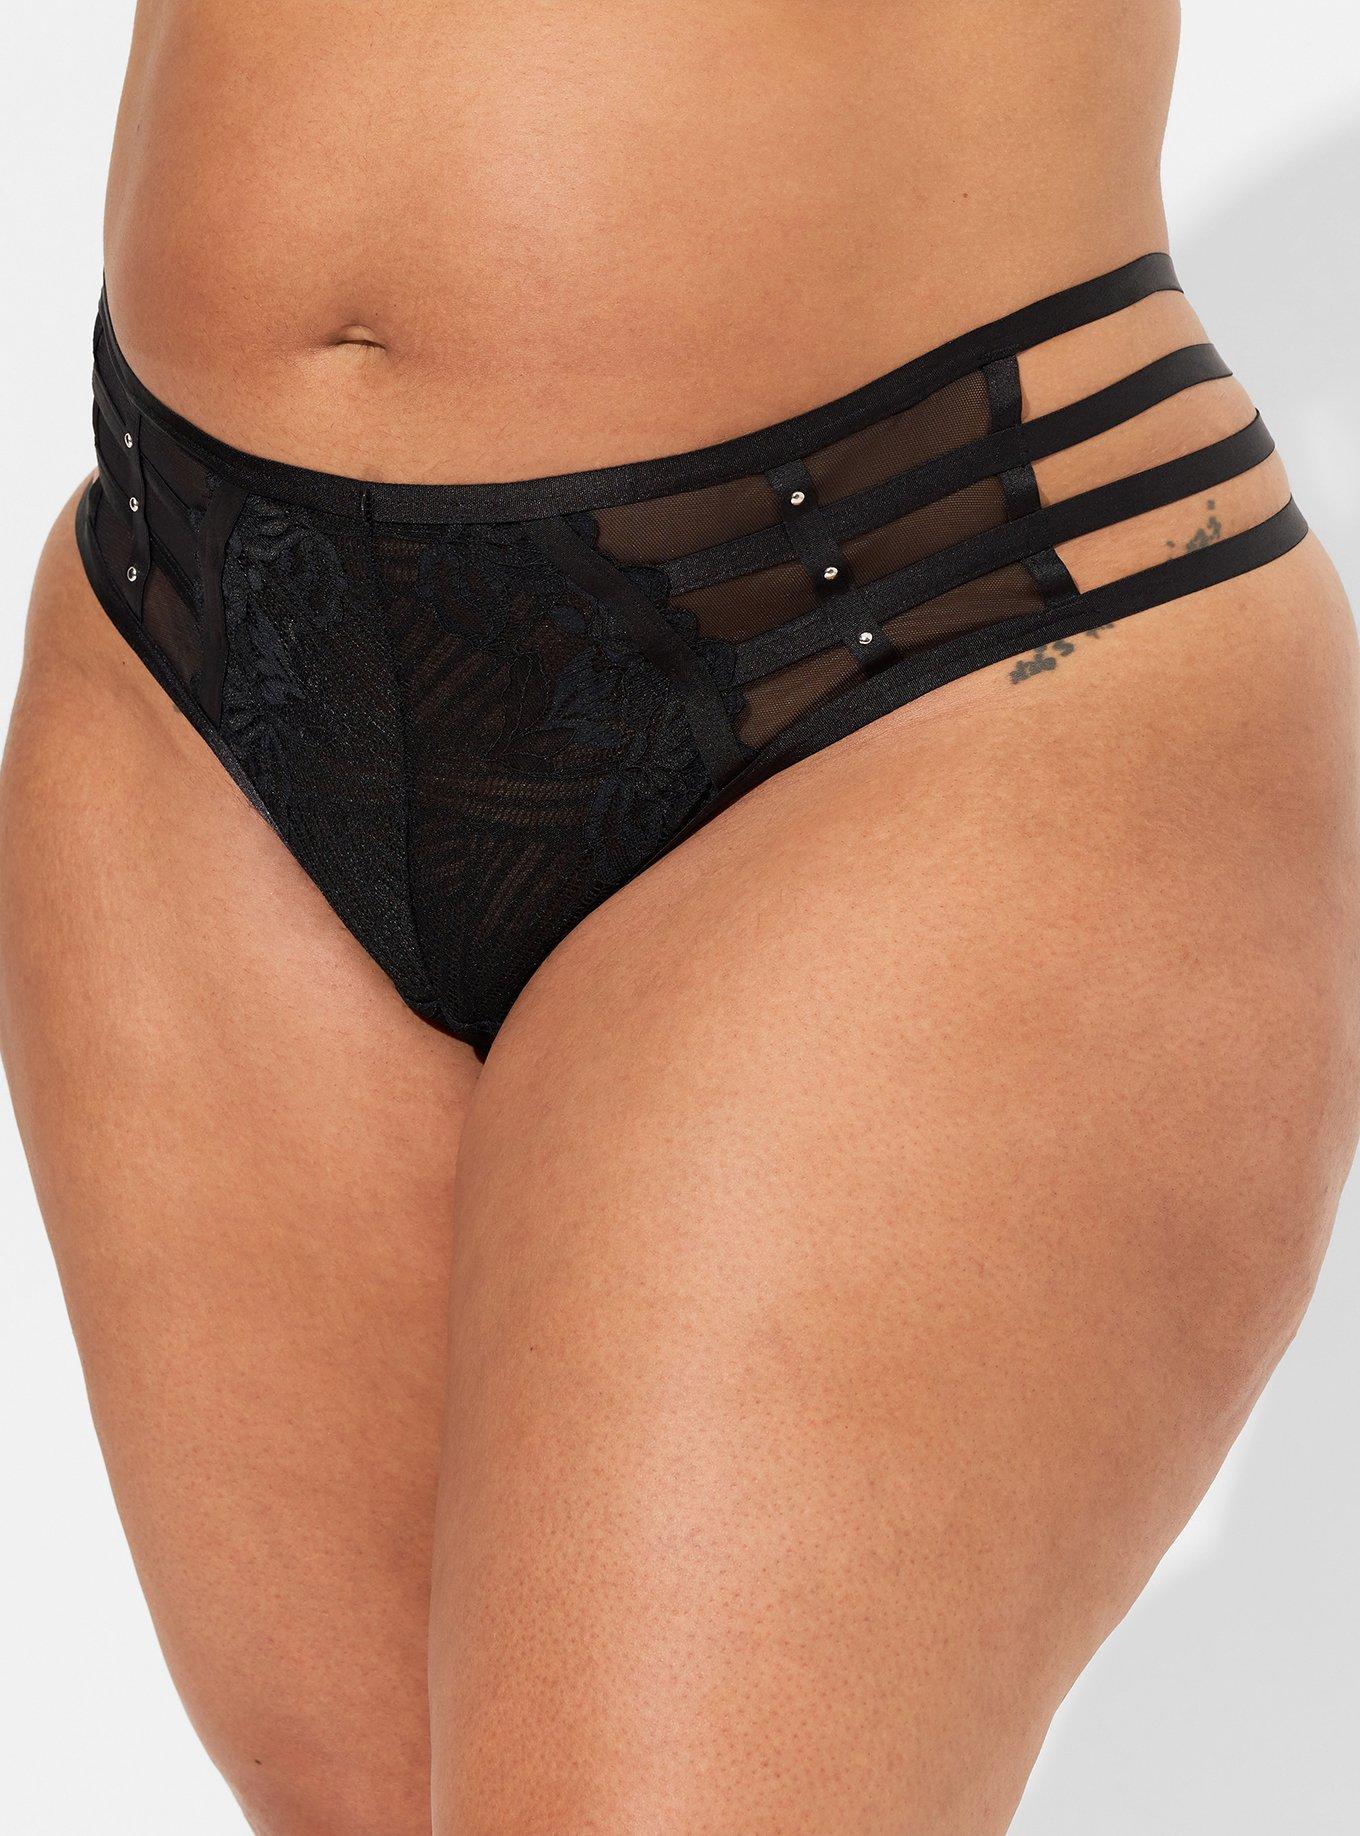 Plus Size - Studs And Lace Thong Panty - Torrid